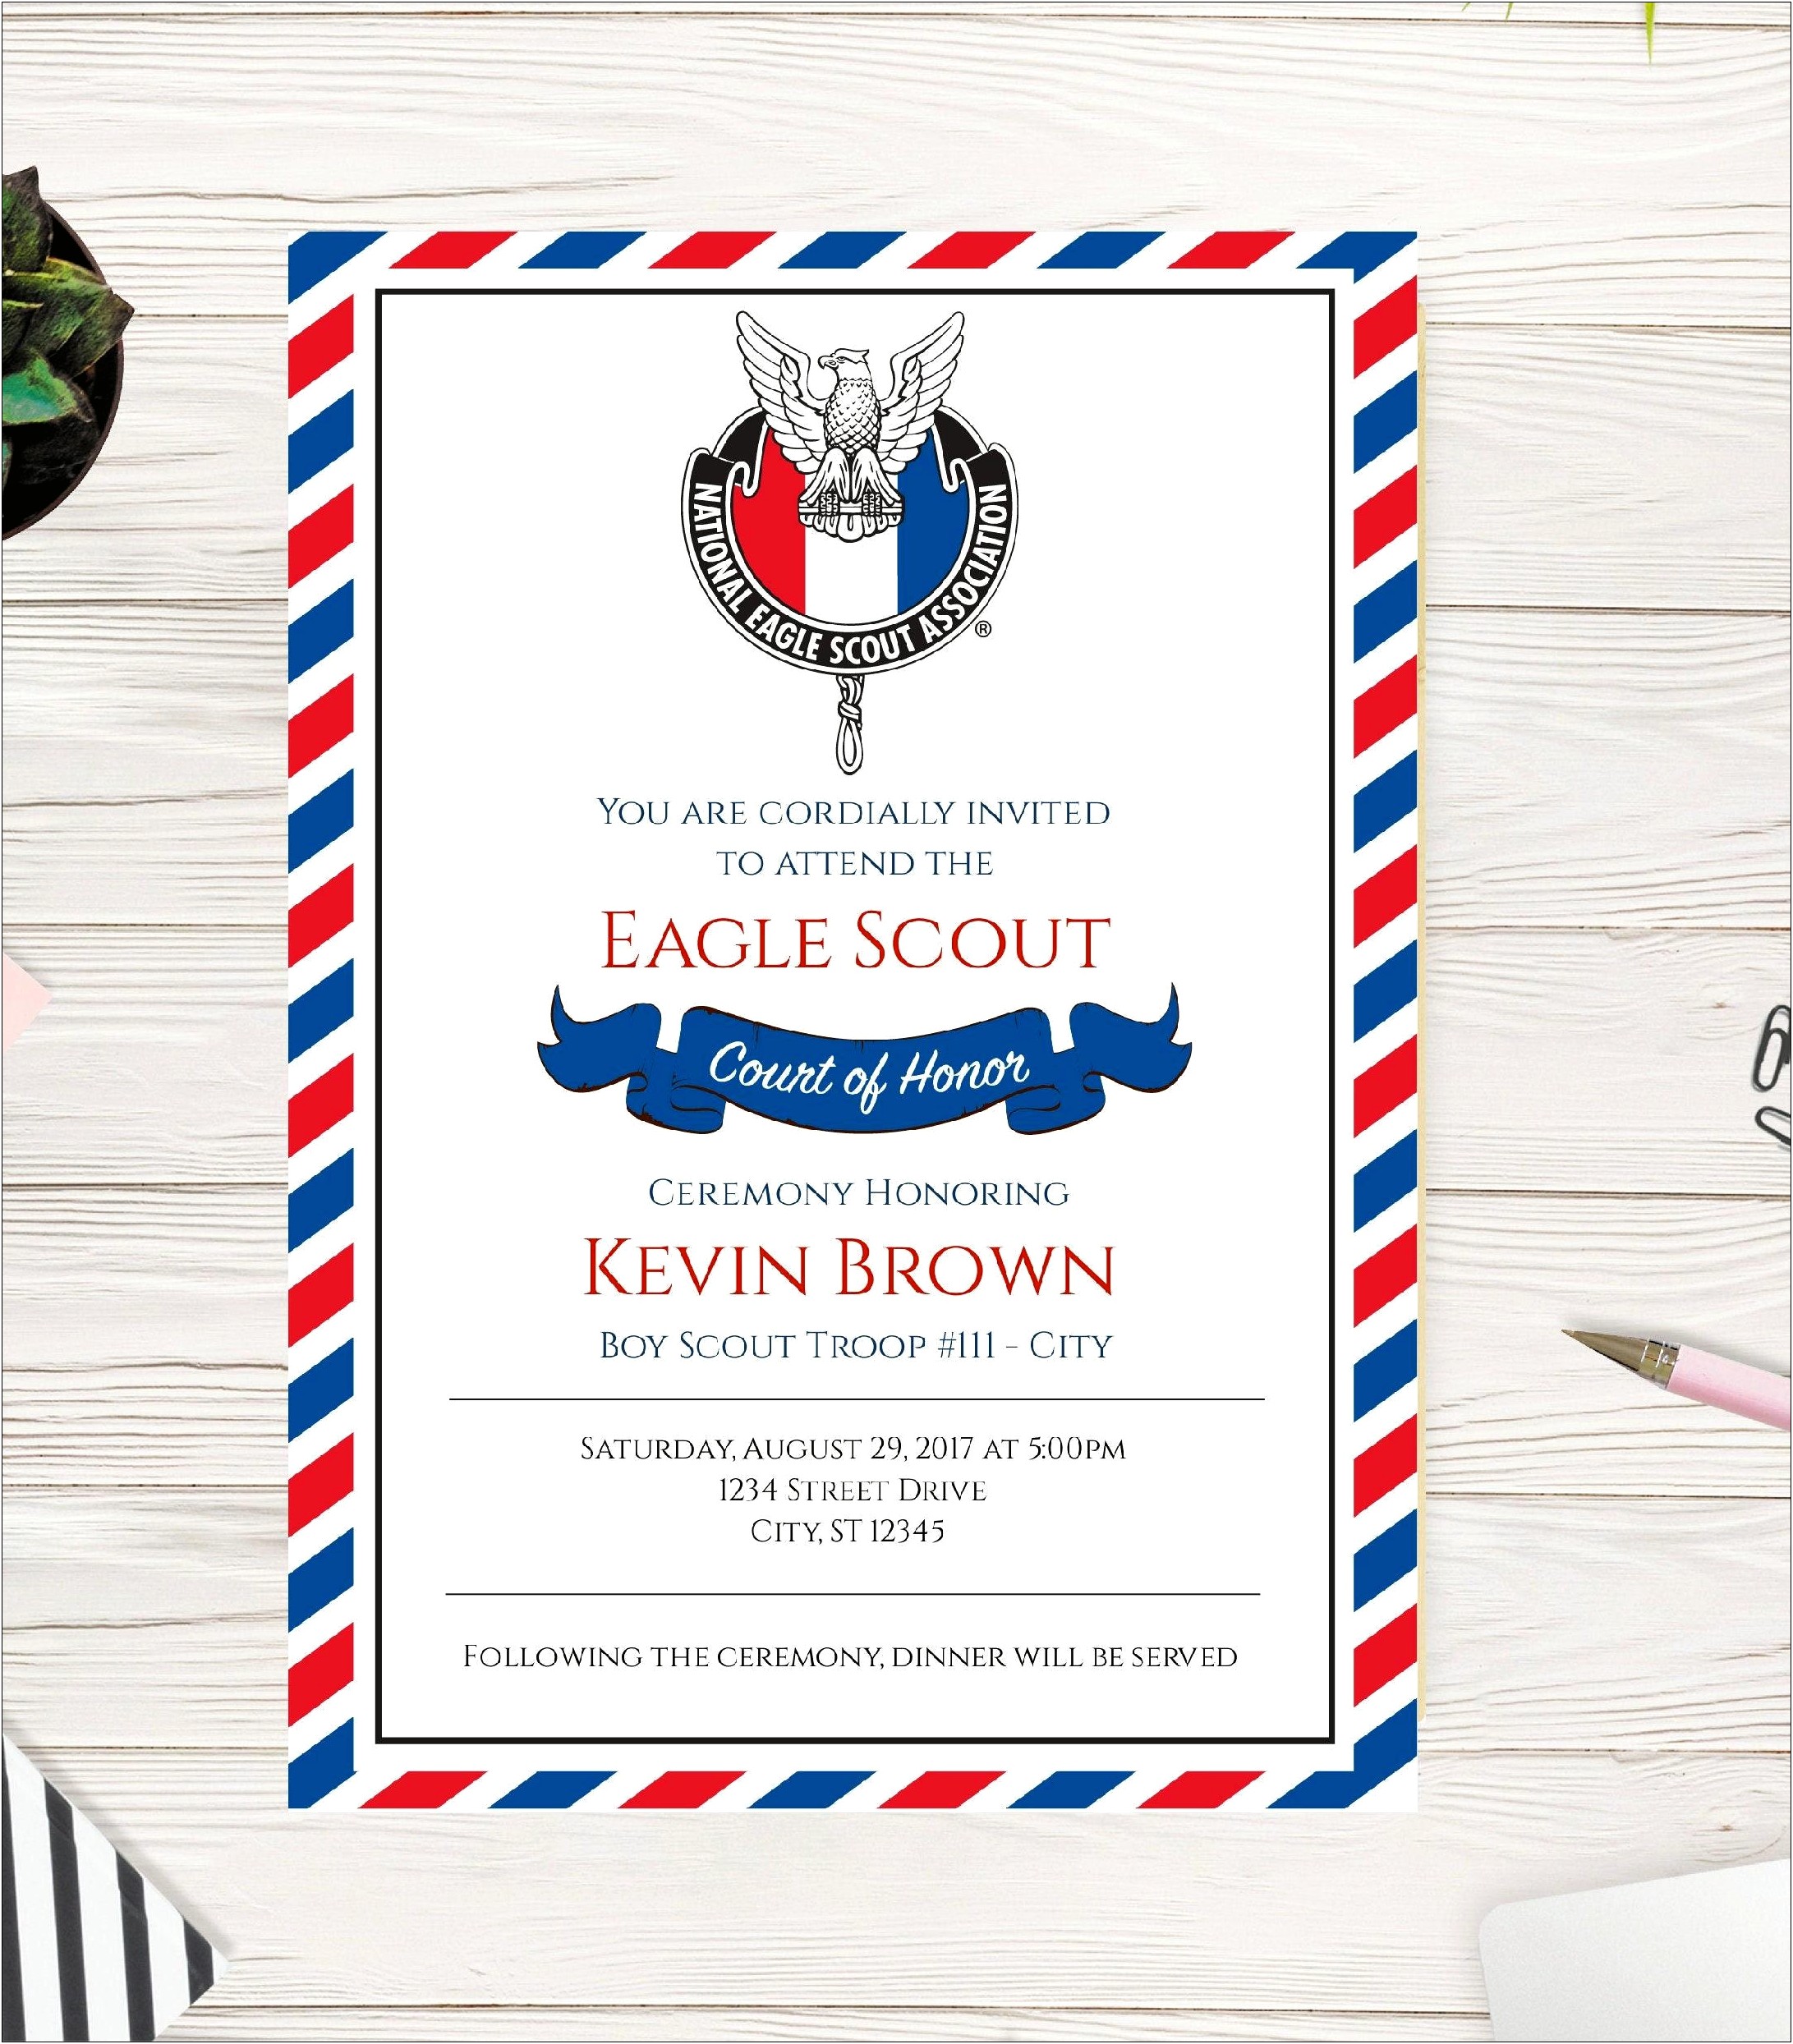 eagle-scout-court-of-honor-free-downloadable-templates-templates-resume-designs-8a1baxkjq7